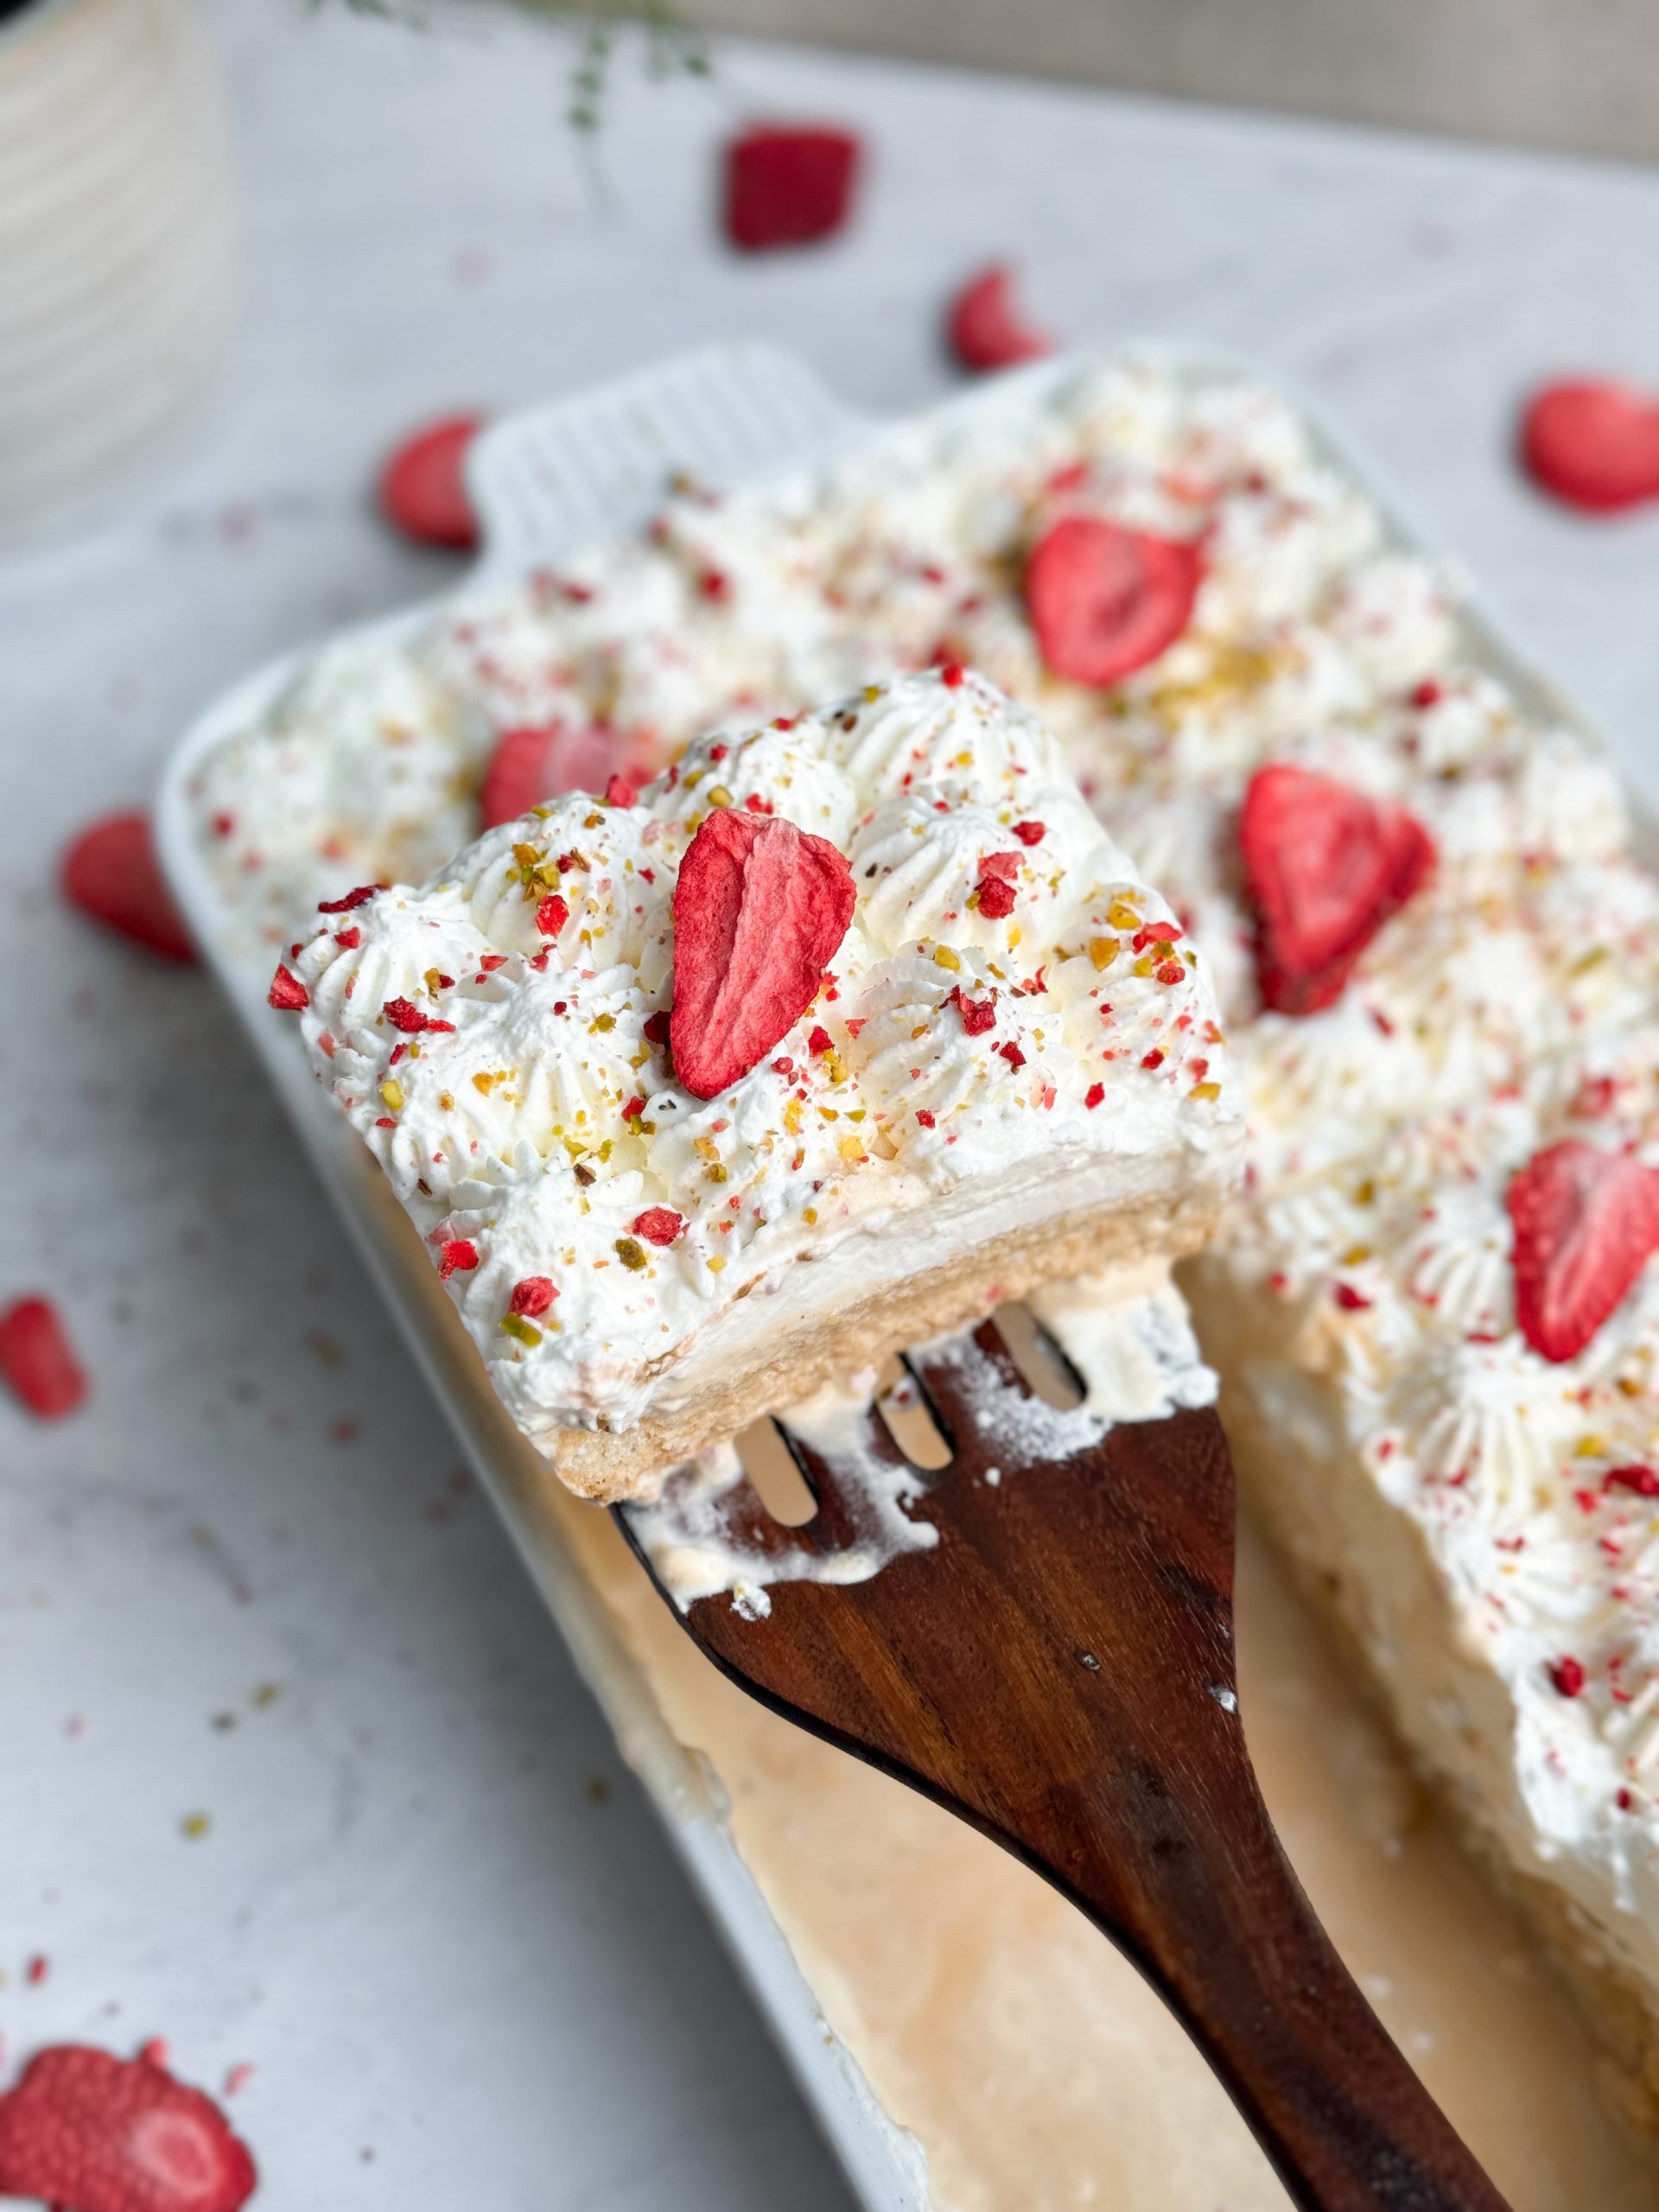 No bake chai tres leches cake in a rectangular ceramic dish decorated with piped whipped cream, freeze dried strawberries and pistachios. The cake is sliced and a spatula is pulling out a slice, picture from the side showing the moist, soaked texture of the cake